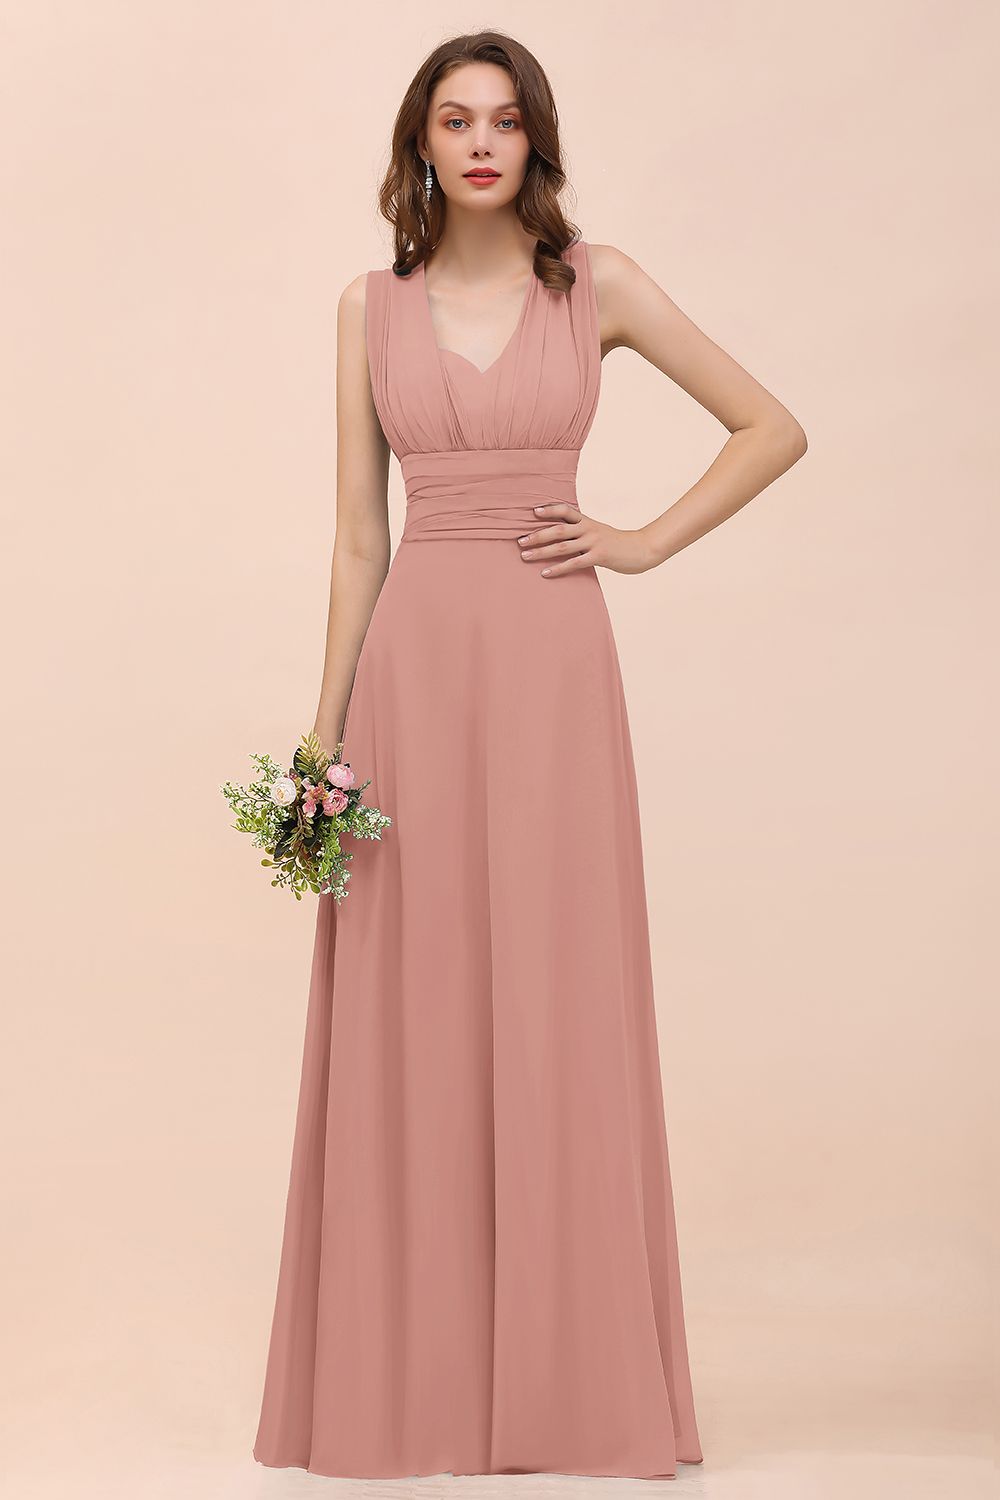 New Arrival Dusty Blue Ruched Long Convertible Bridesmaid Dresses-27dress